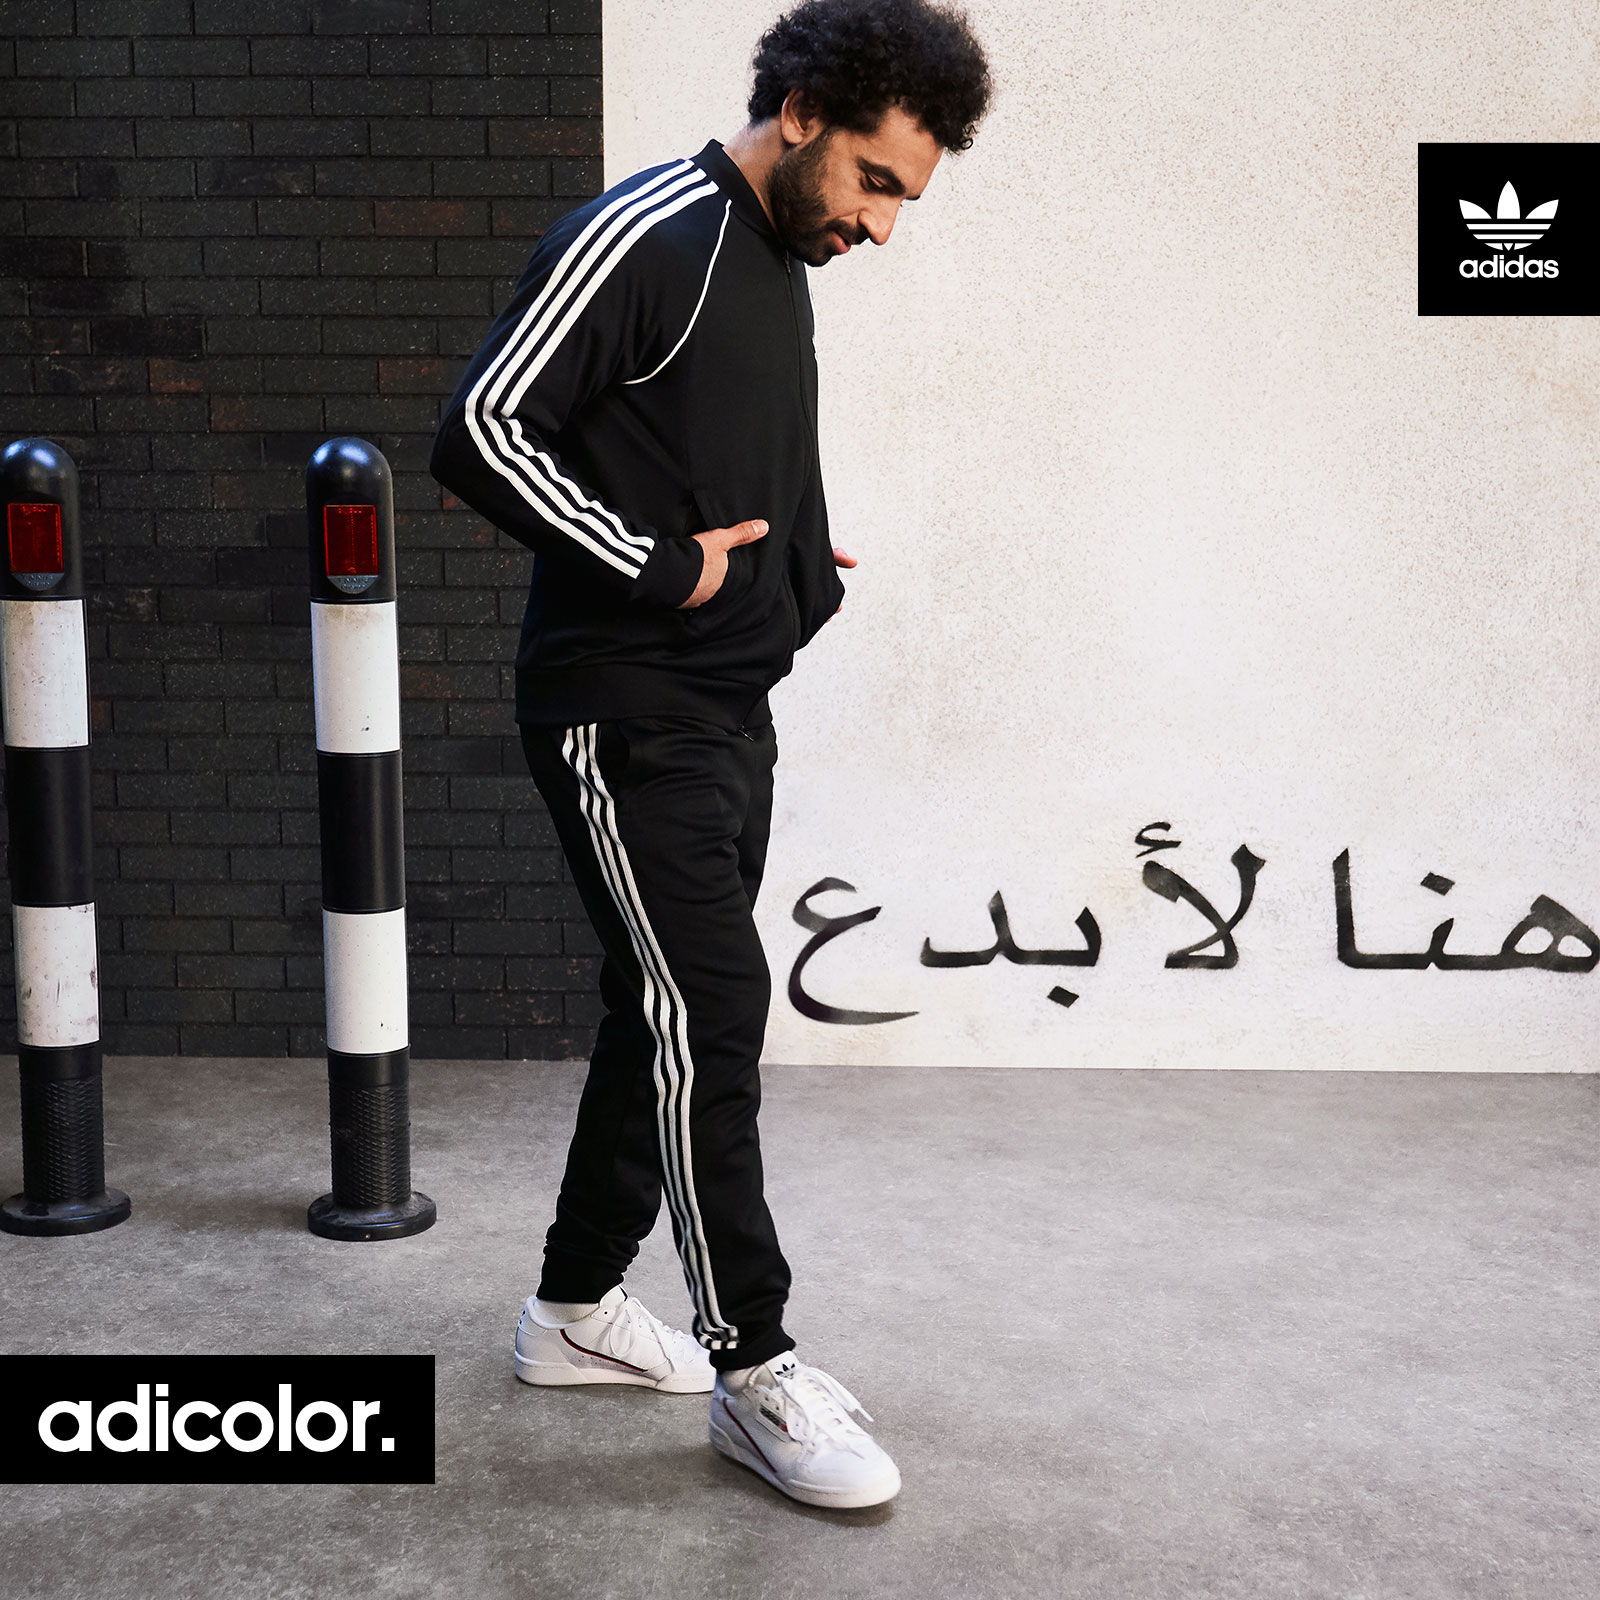 adidas middle east